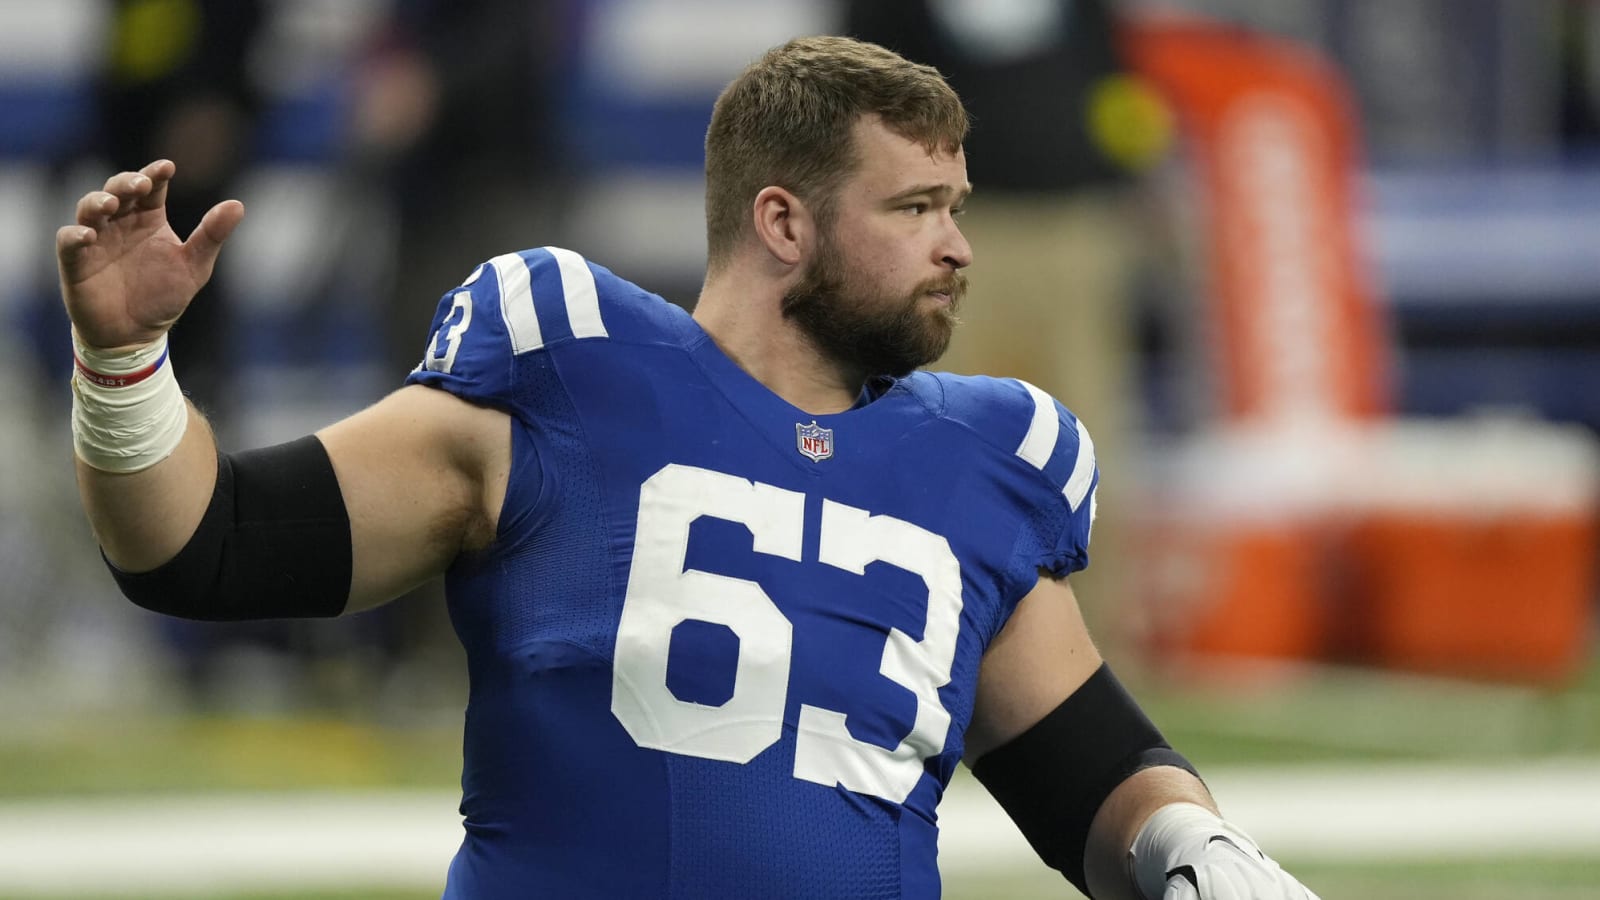 Colts center out for season with broken ankle